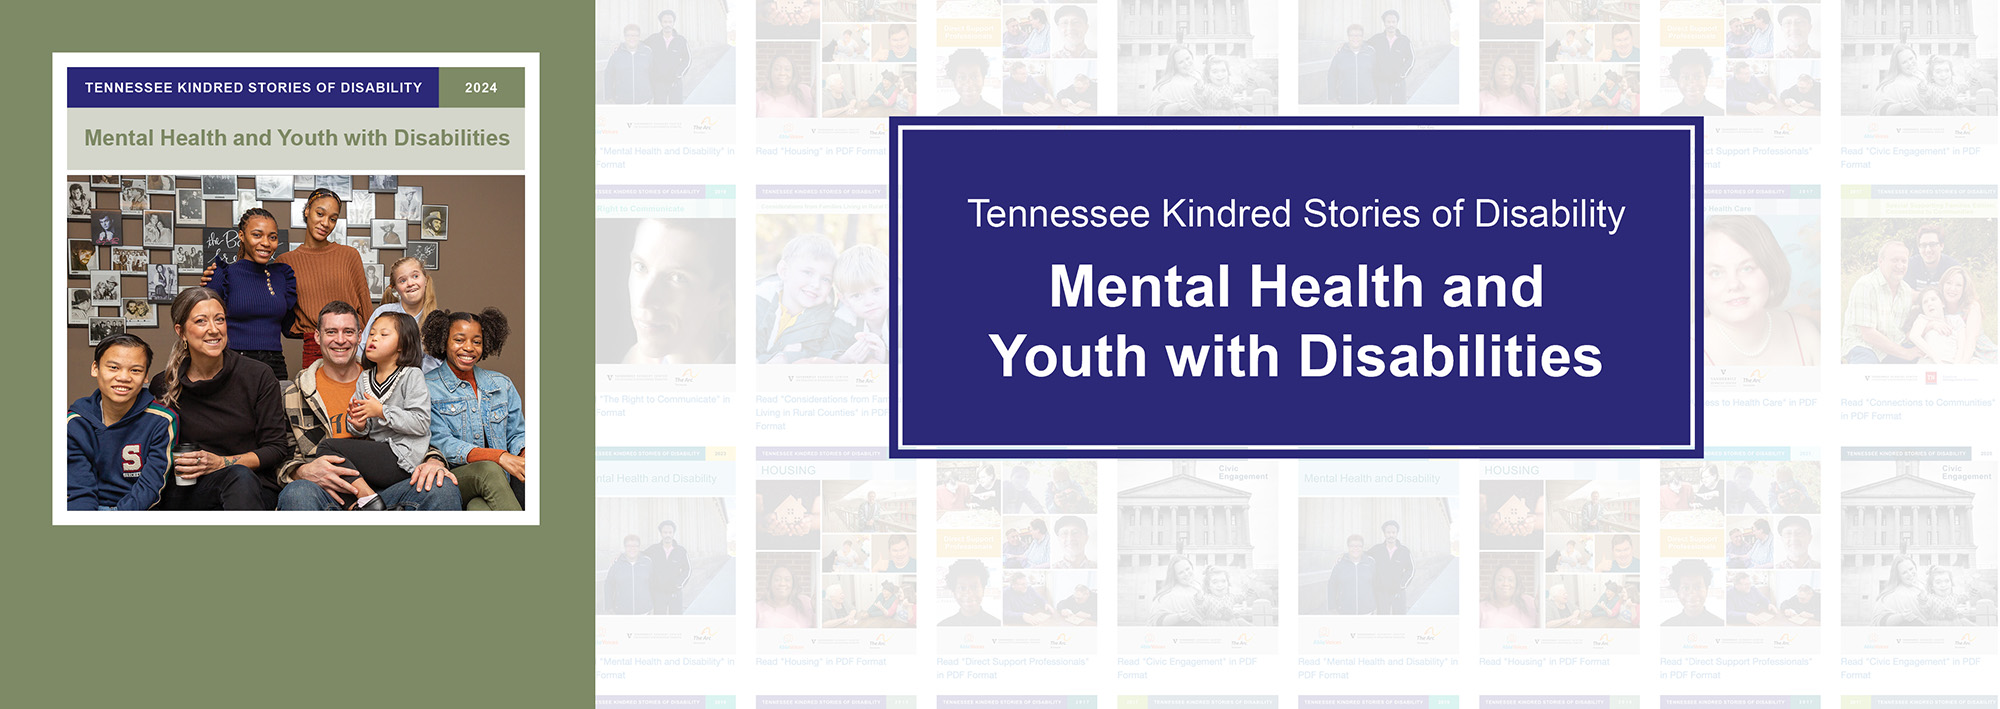 <p>Tennesseans share their personal stories about mental health and disabilities in the latest issue of <em>Kindred Stories of Disability</em>.</p>